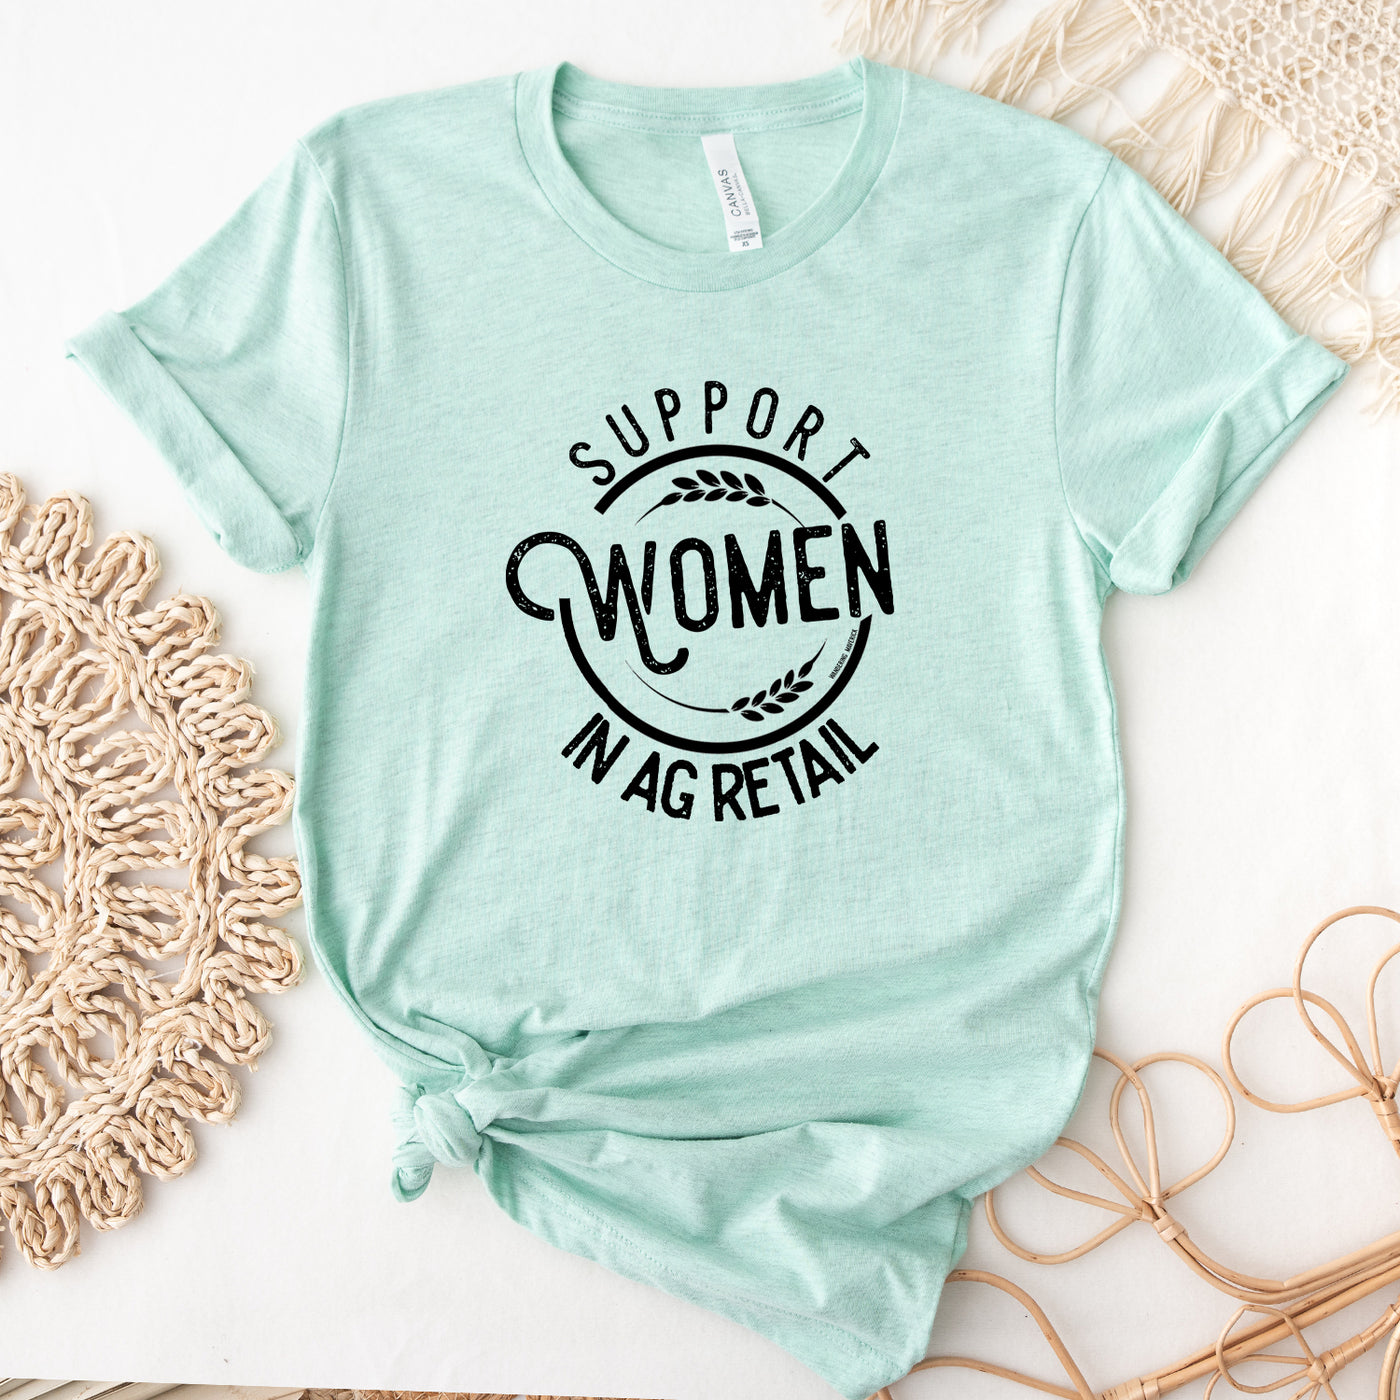 Support Women In Ag Retail T-Shirt (XS-4XL) - Multiple Colors!